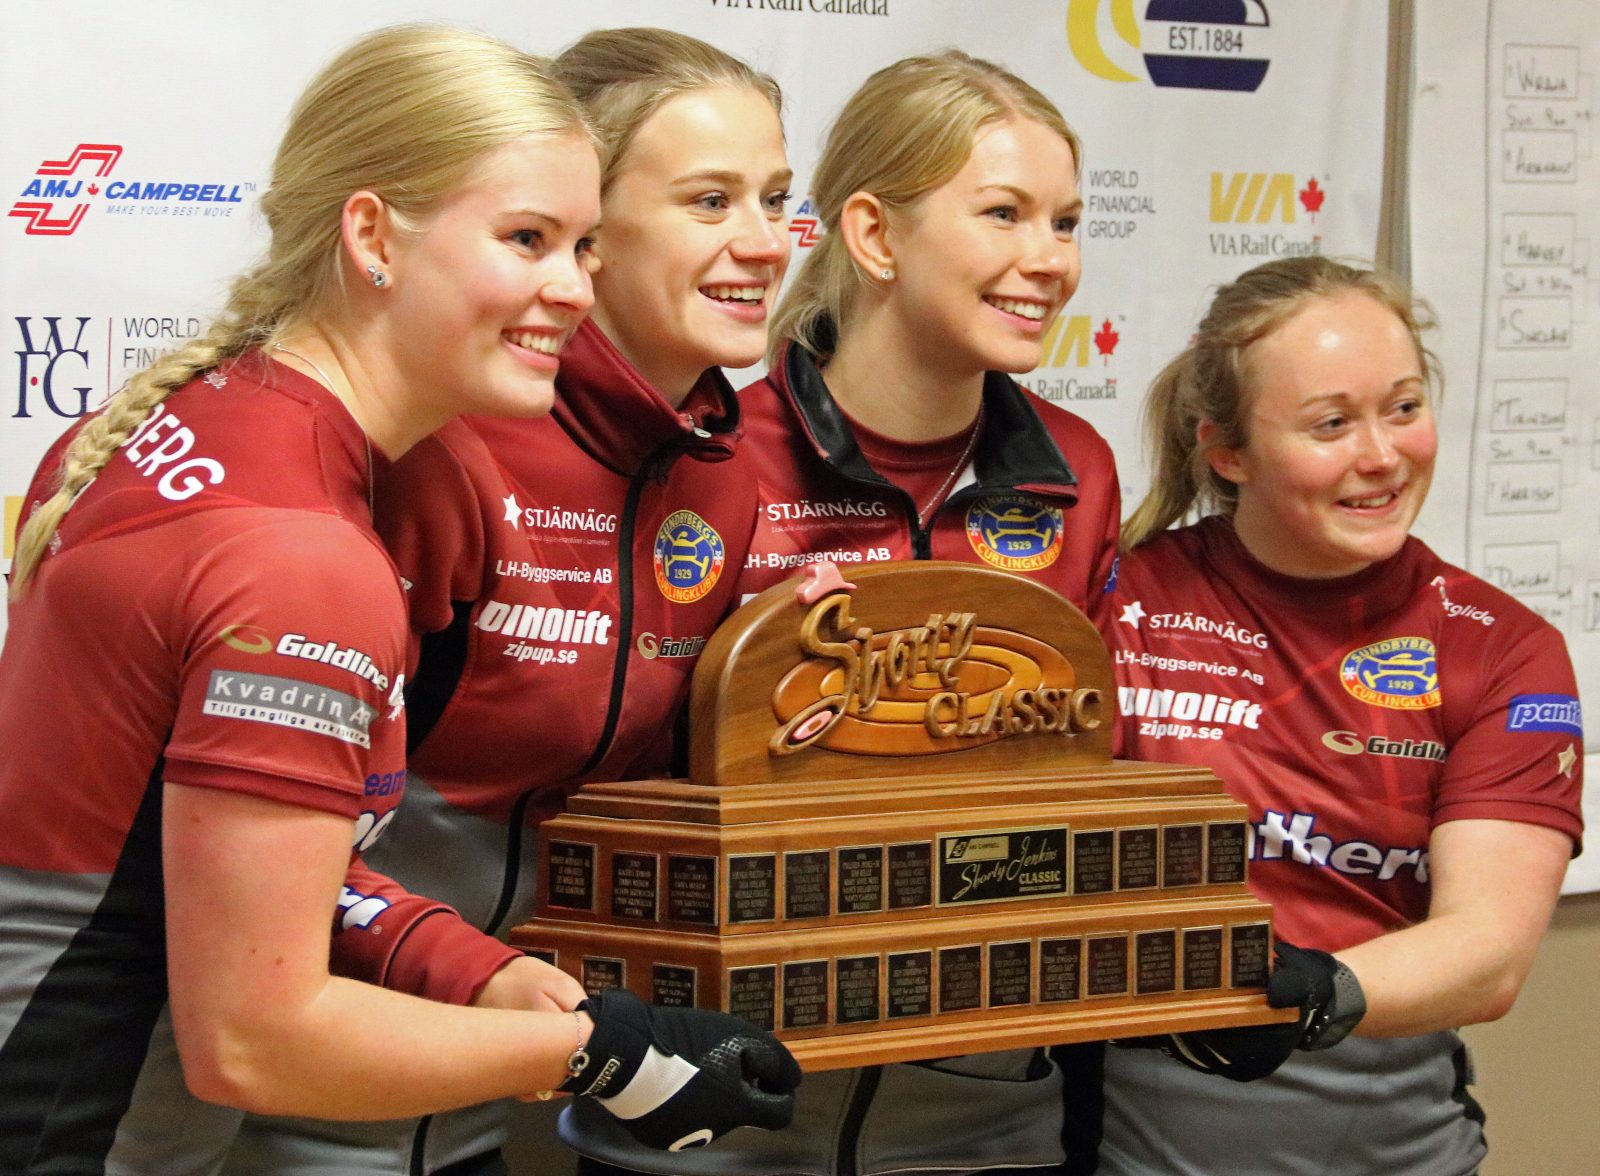 Shorty Jenkins Classic to bring world-class curlers to Cornwall